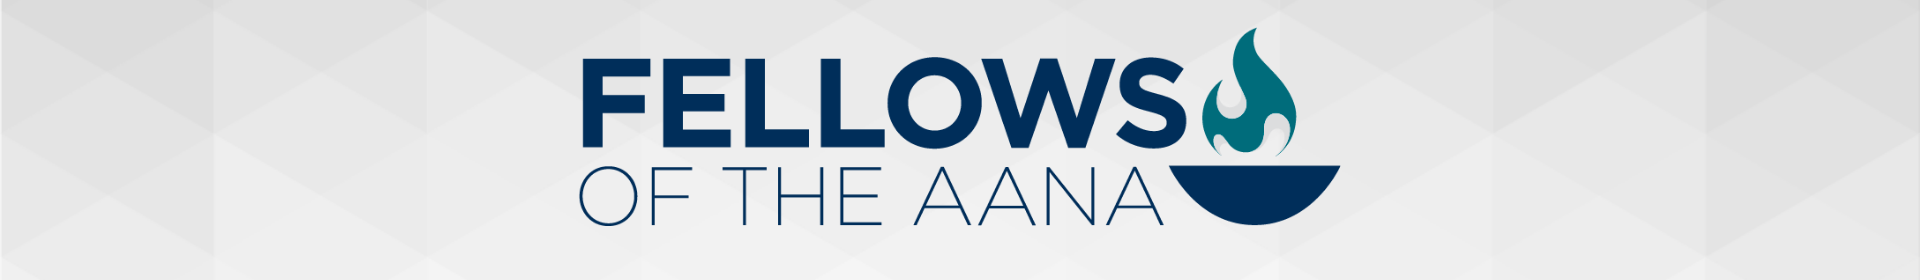 Fellows of the AANA Application Event Banner